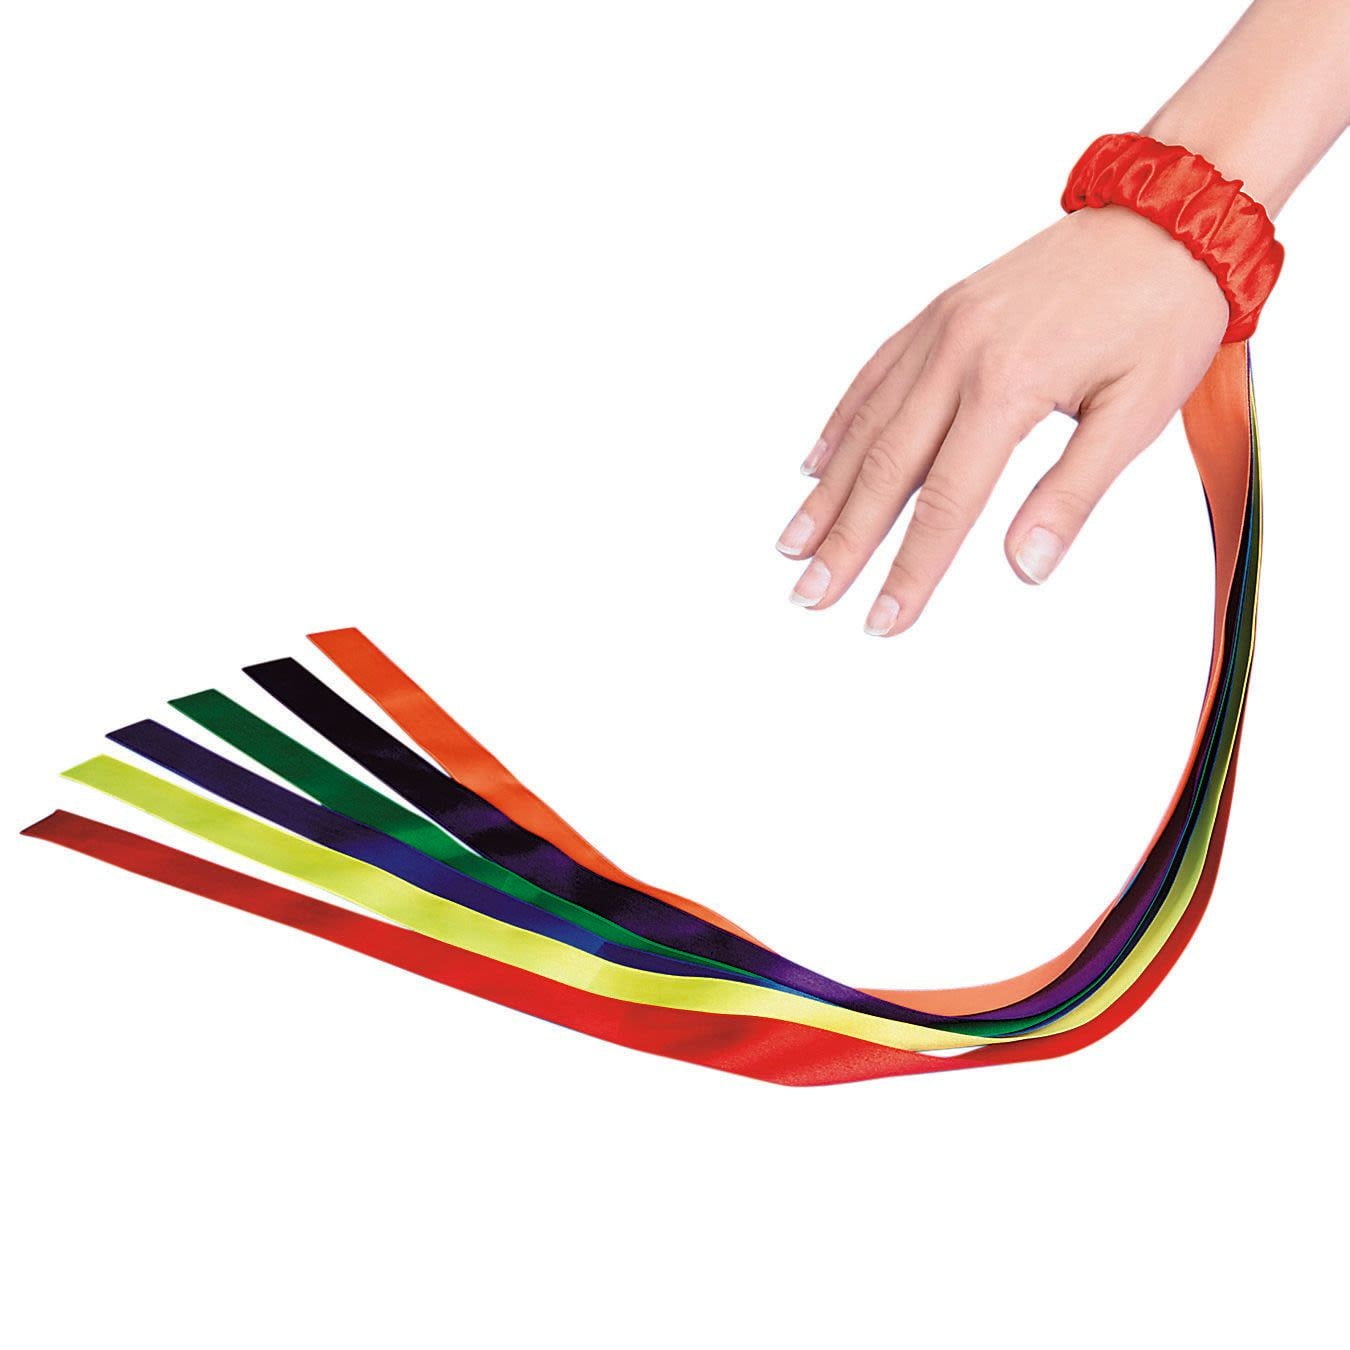 S&S Wrist Ribbons (Pack of 12)